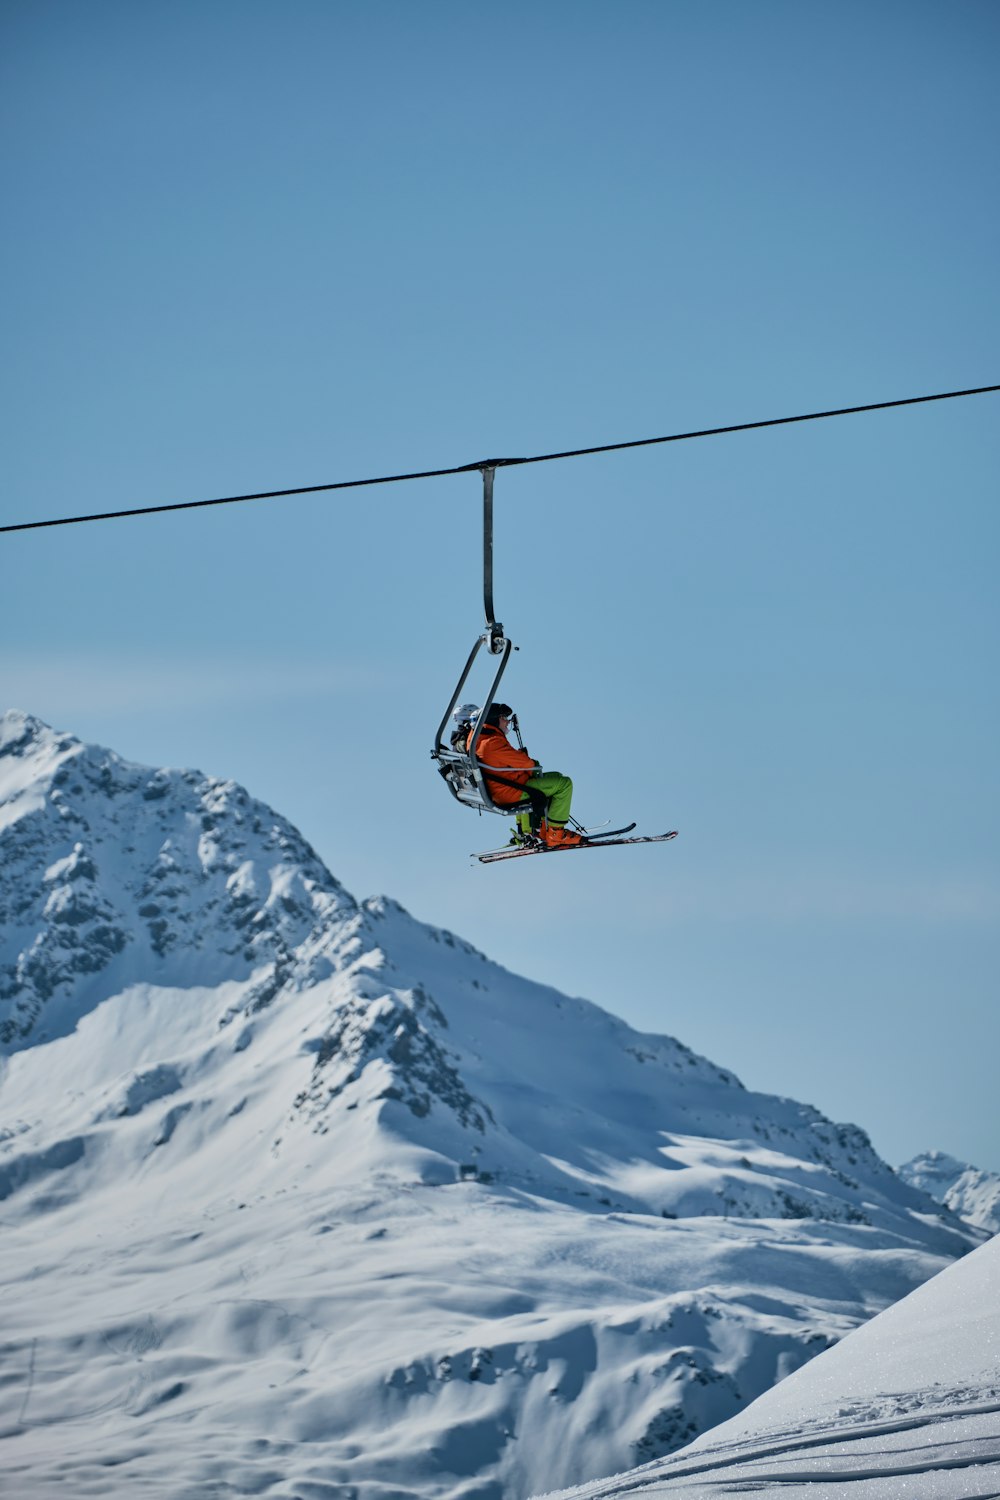 a person riding skis on top of a ski lift